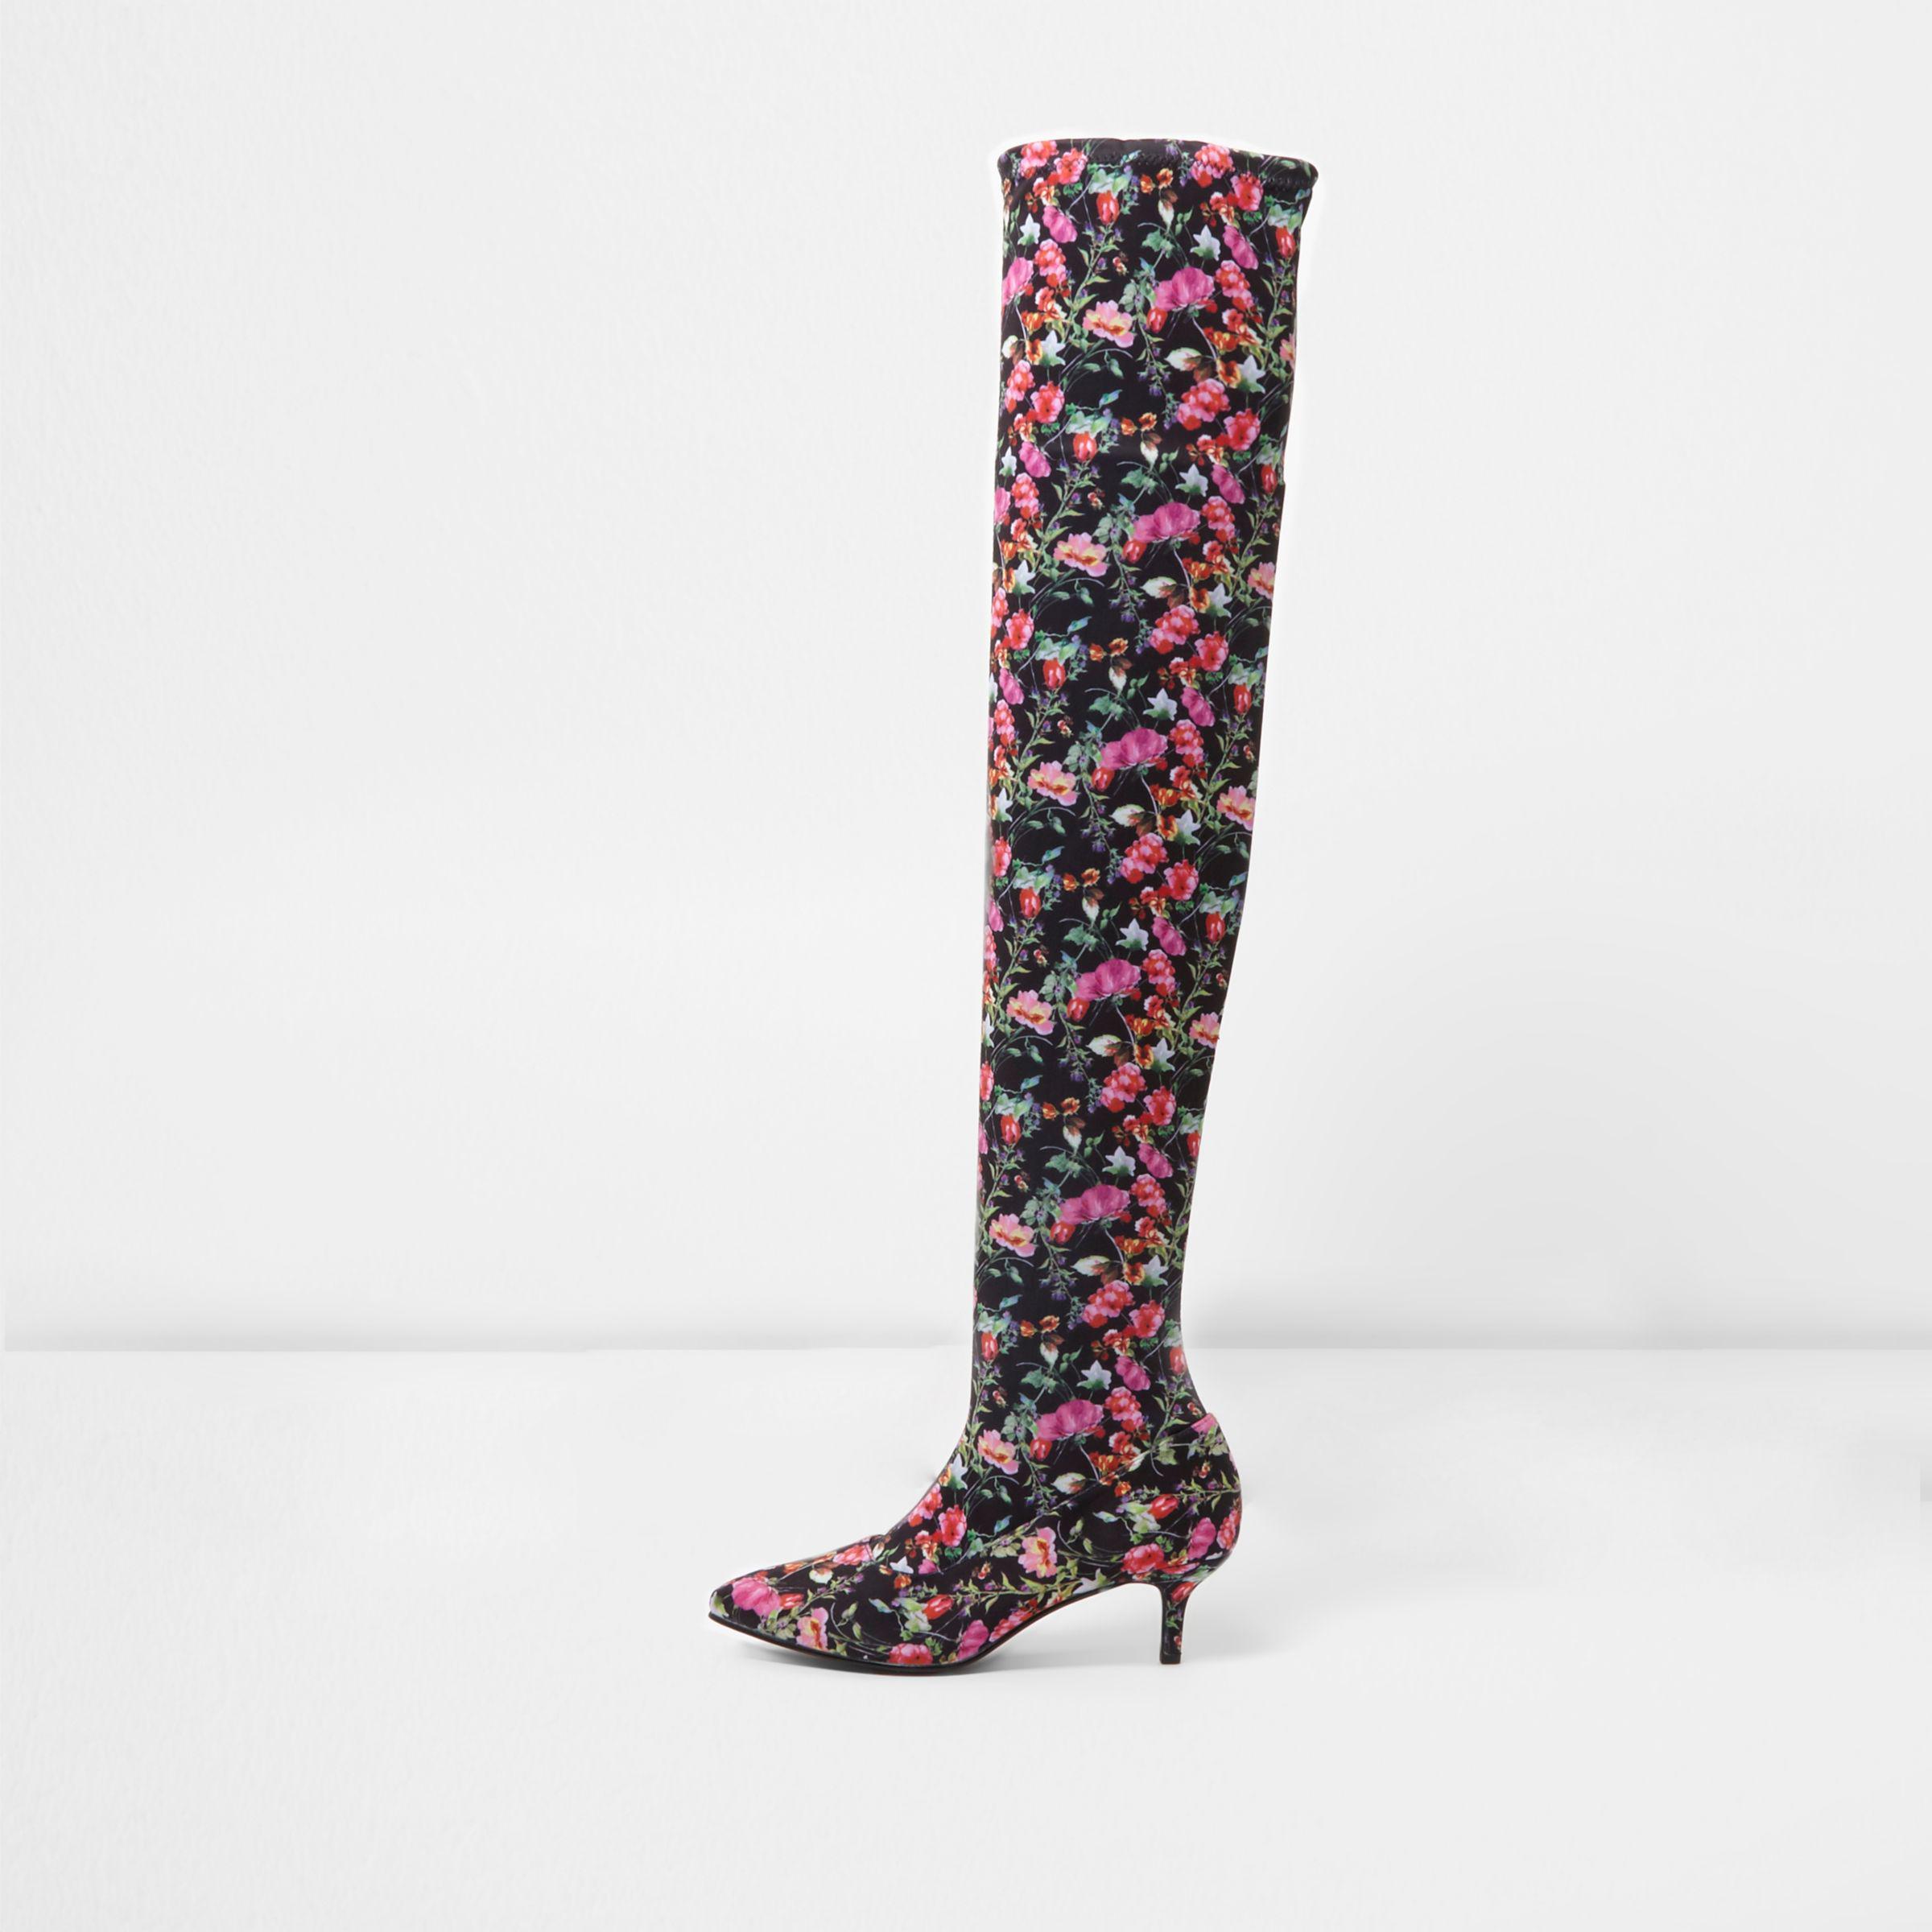 River Island Black Floral Over-the-knee Kitten Heel Boots - Lyst